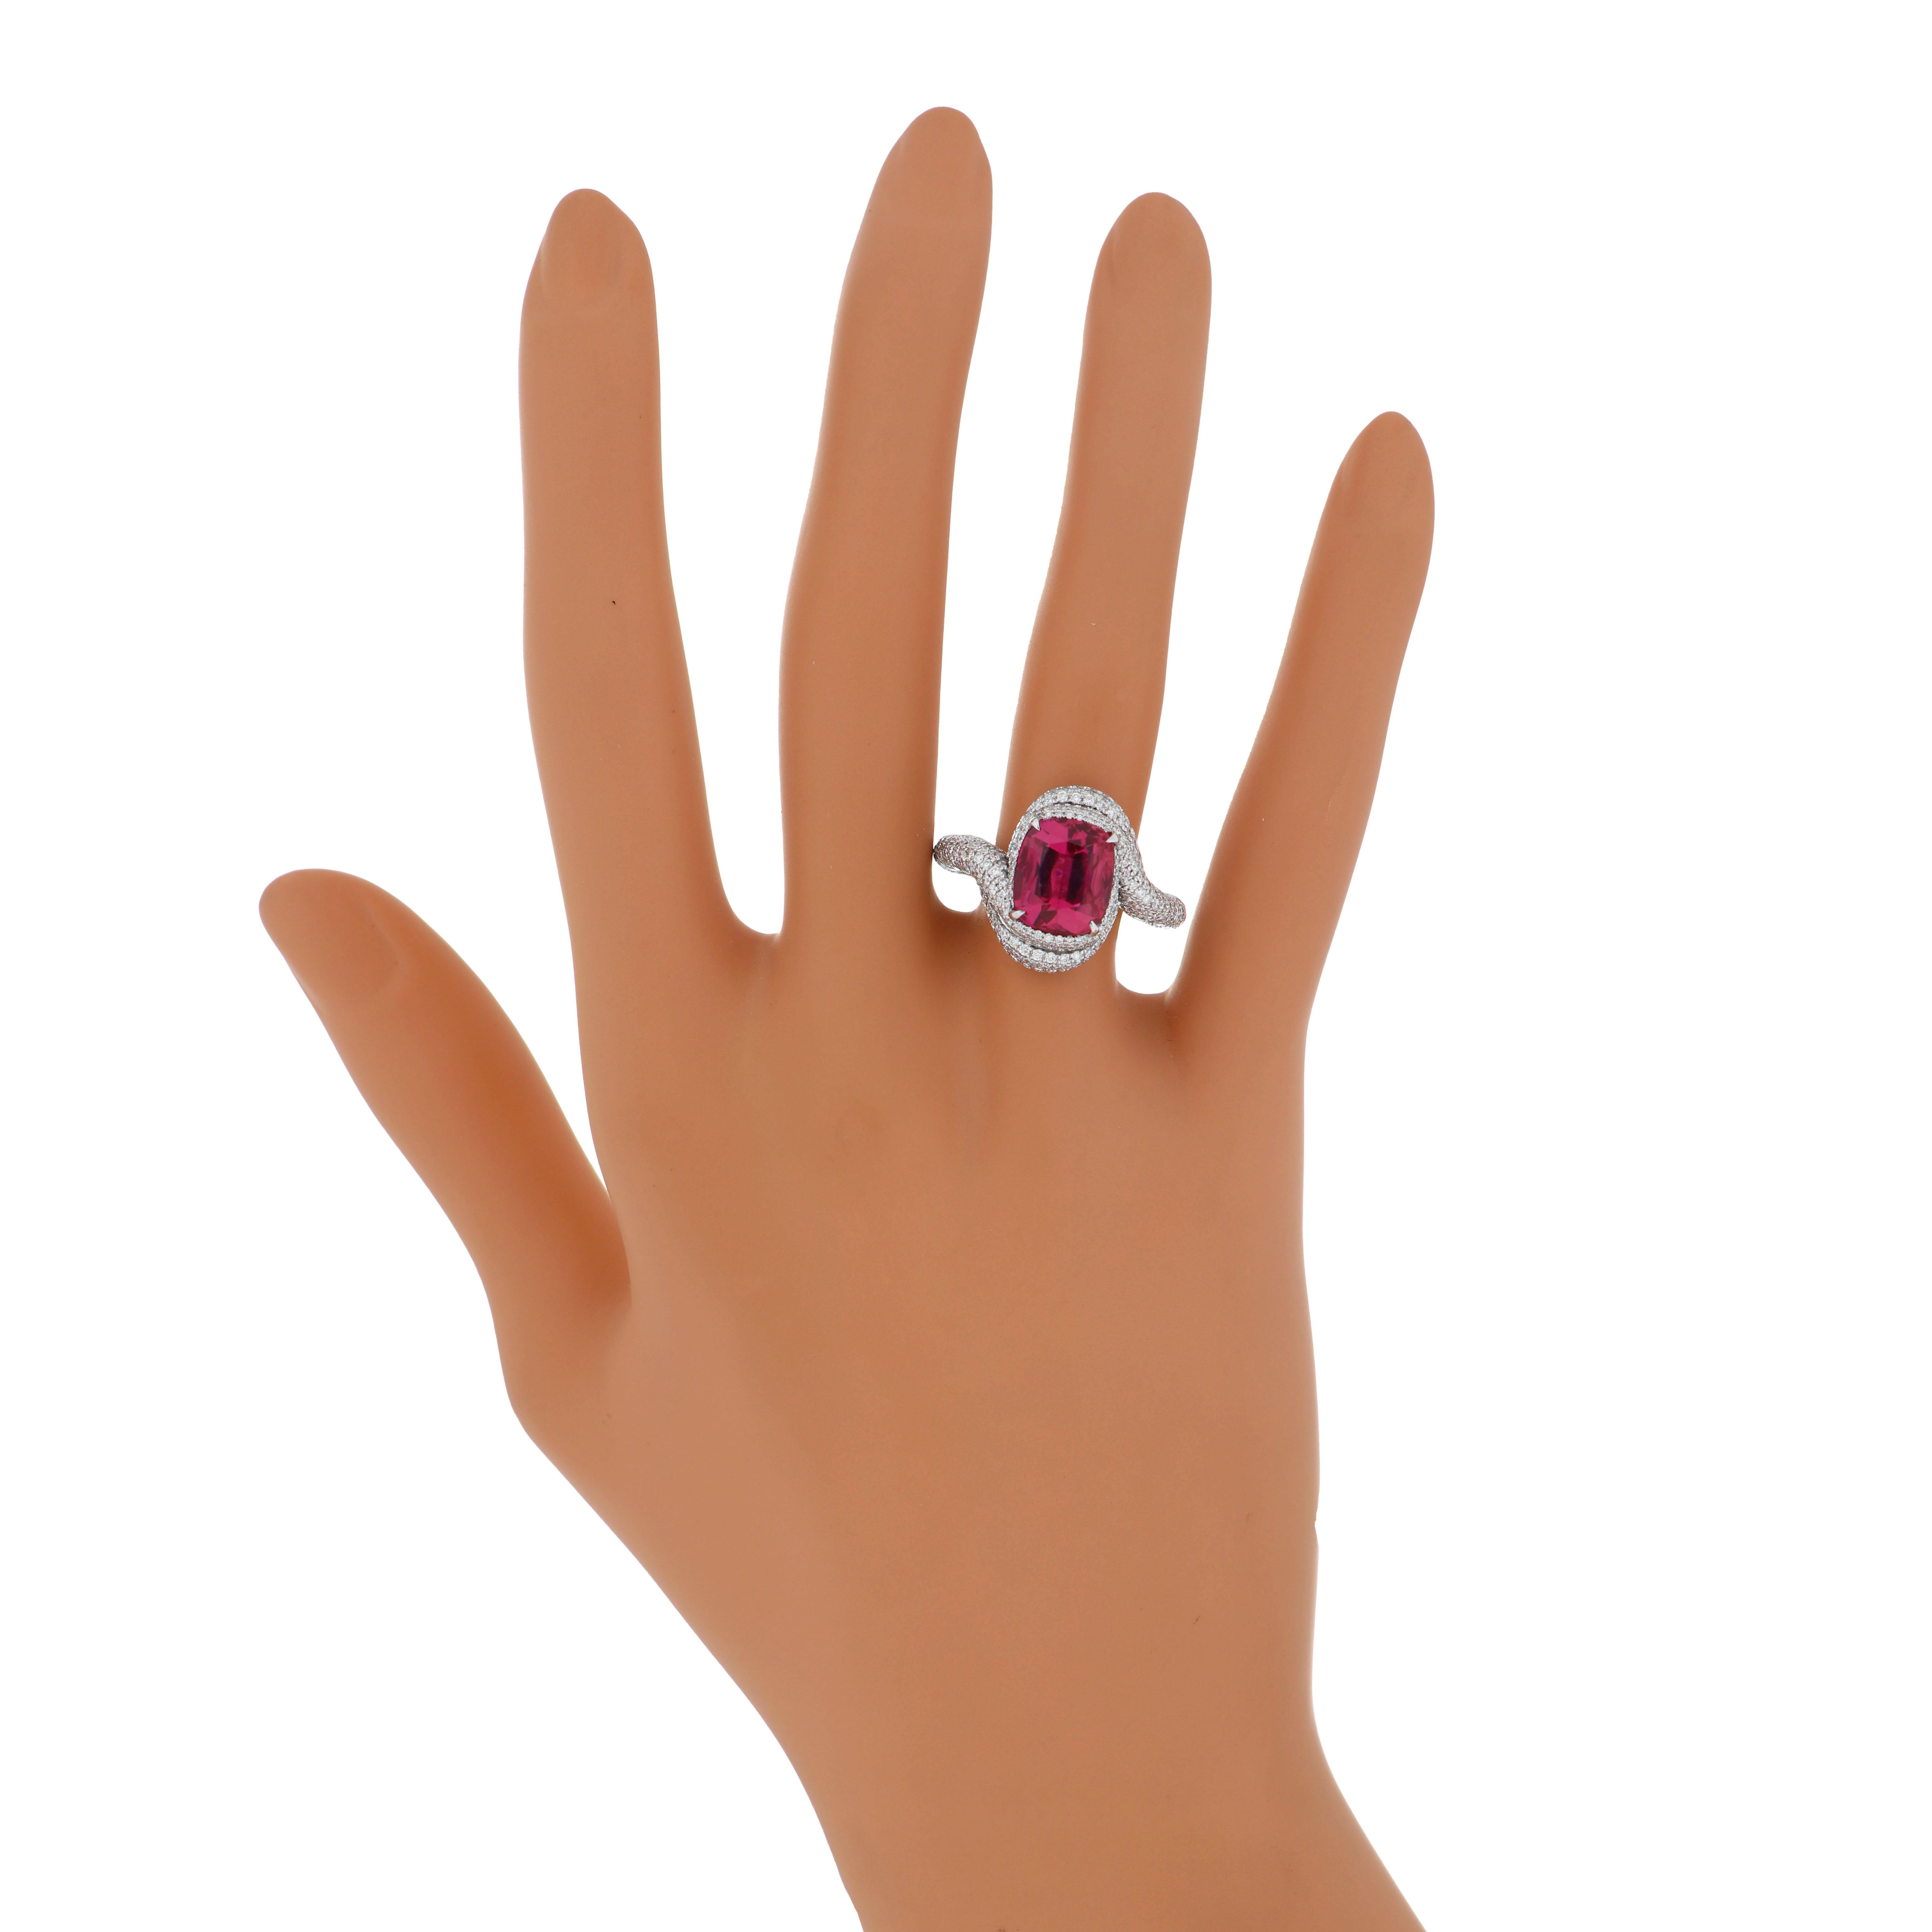 4.05 Carats Rubellite and Diamond Studded Ring in 18K White Gold Ring For Sale 3